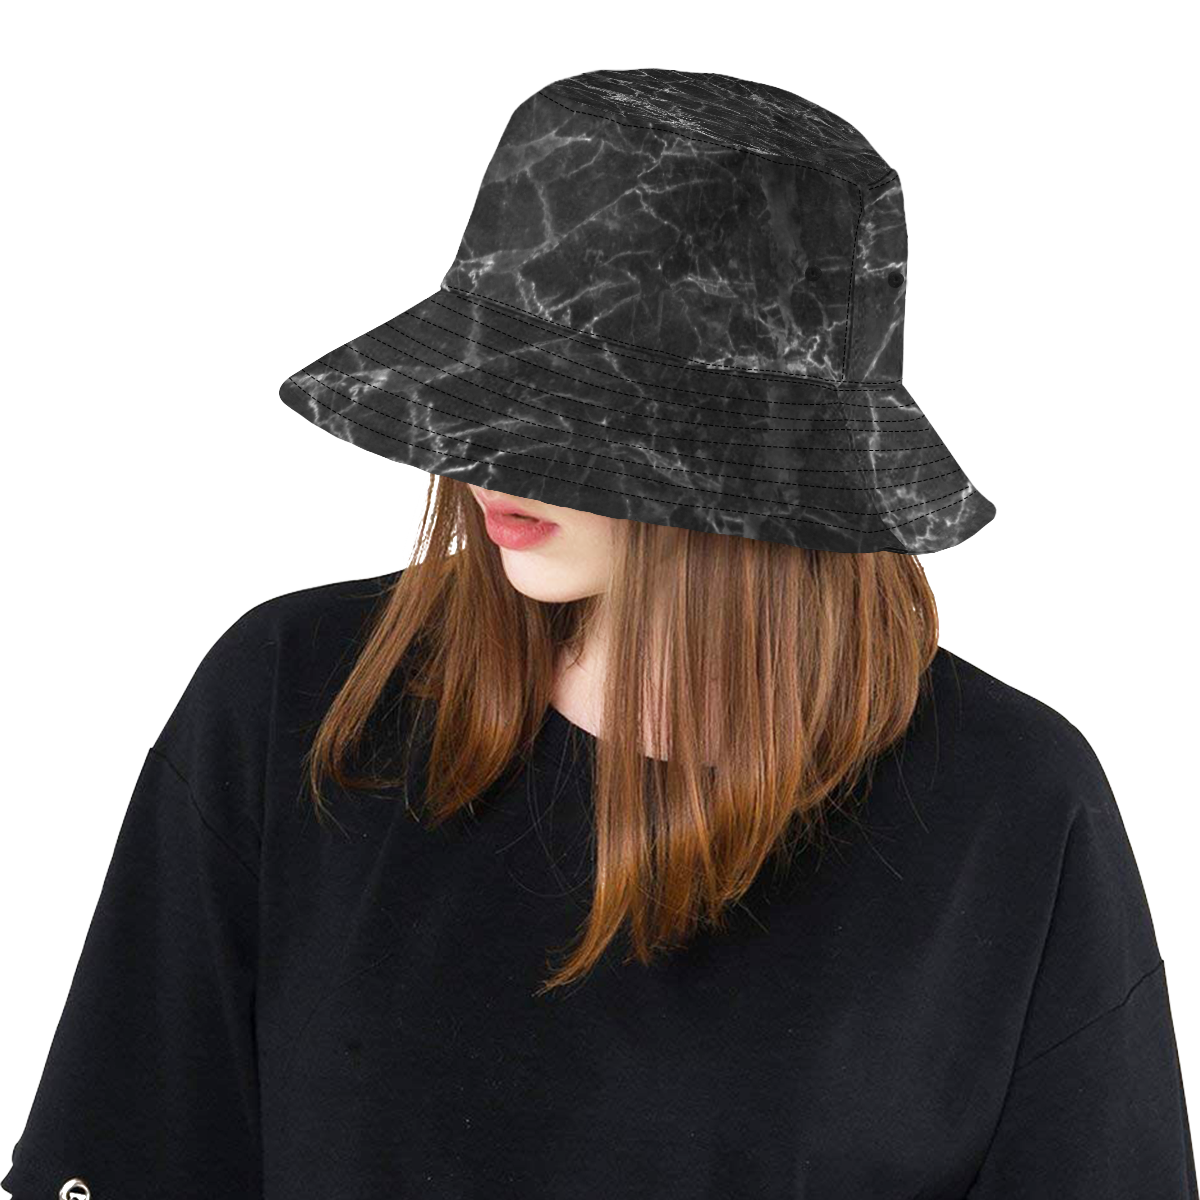 Marble Black Pattern All Over Print Bucket Hat